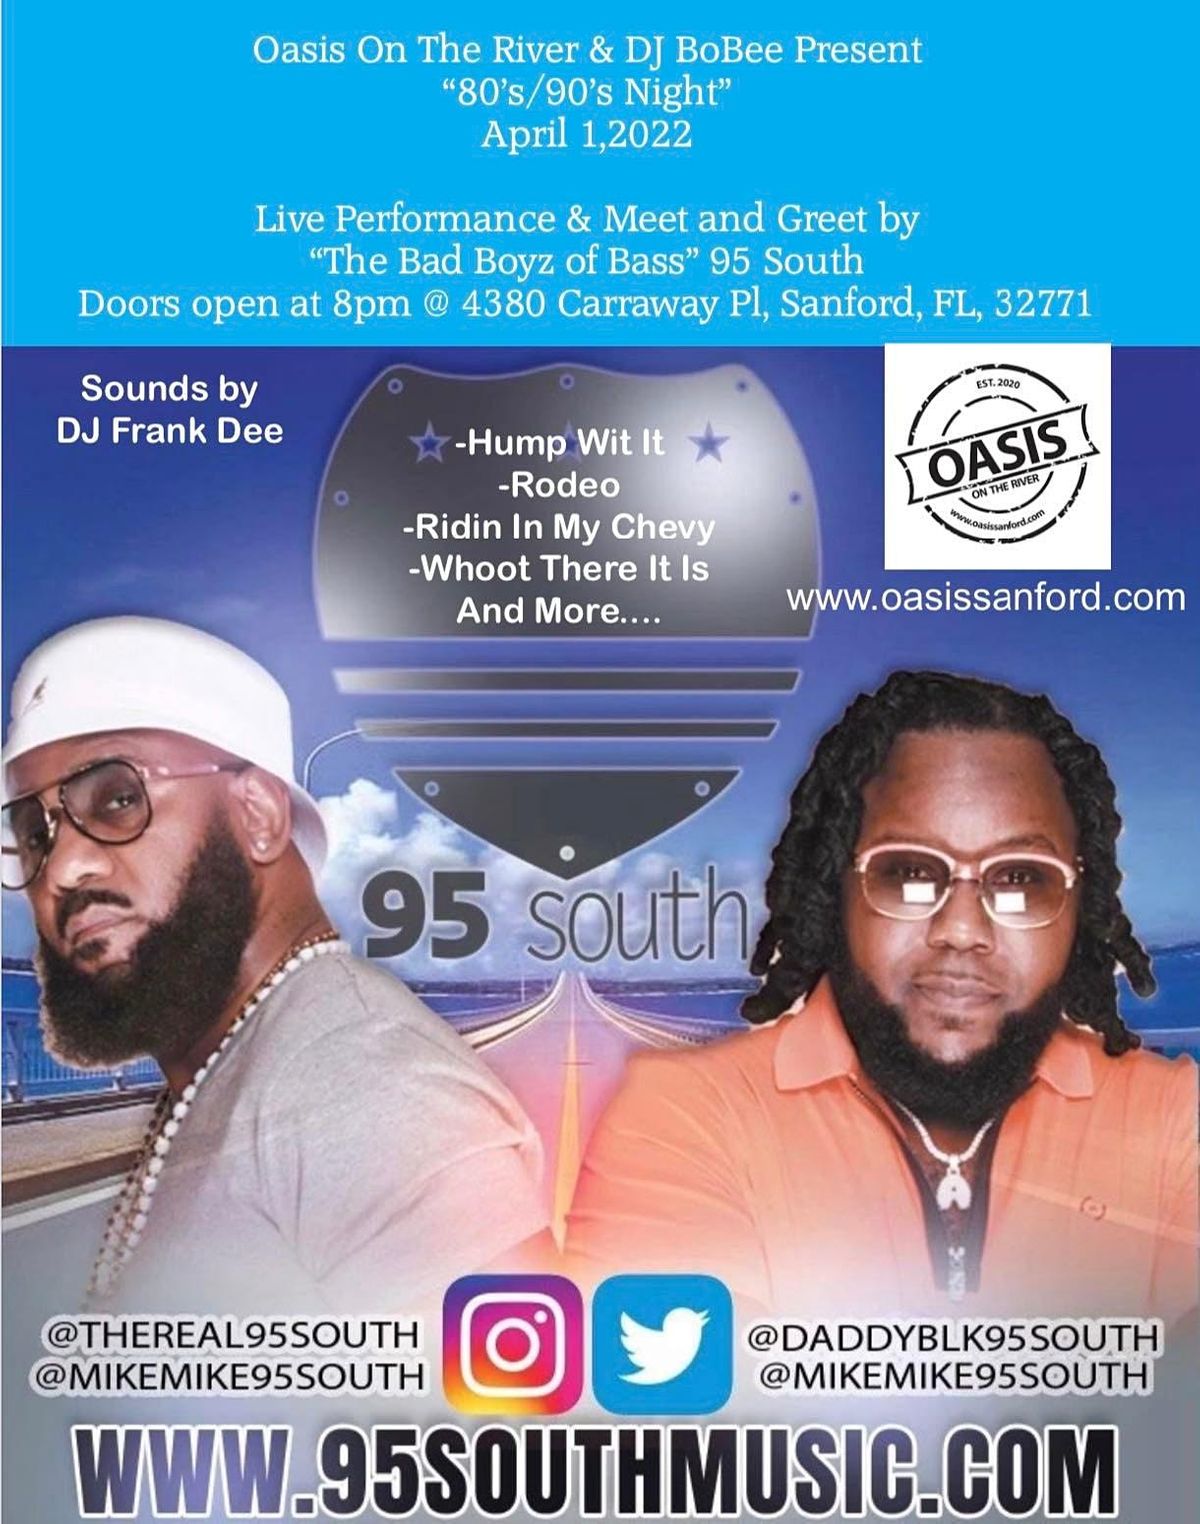 95 SOUTH WHOOT THERE IT IS TOUR Oasis on the River, Sanford, FL